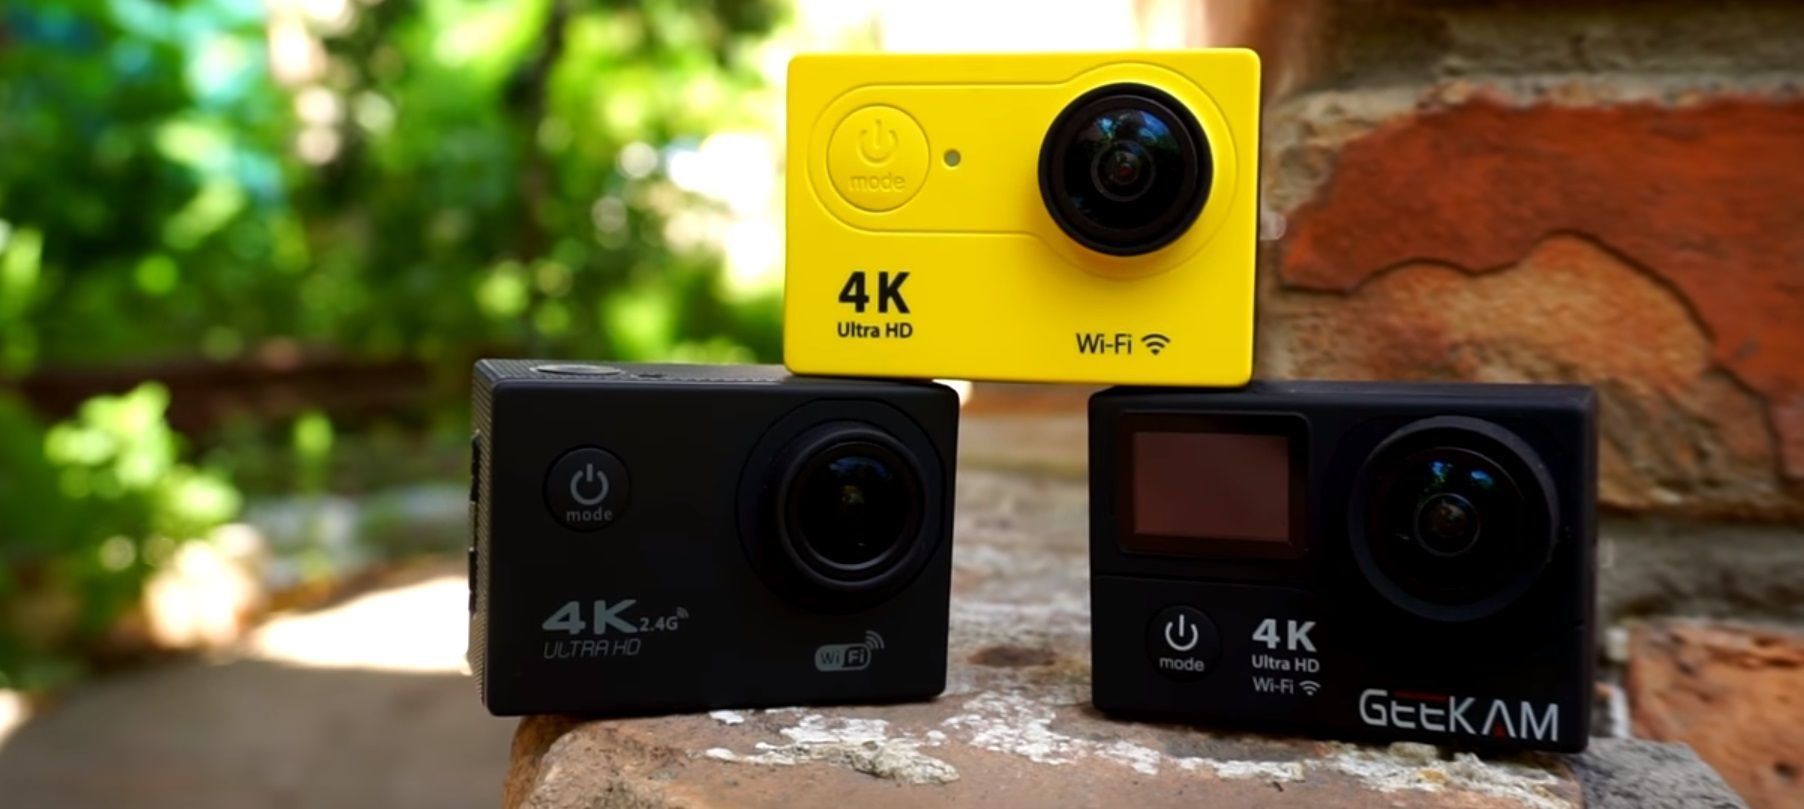 Review of the best EKEN action cameras for 2022